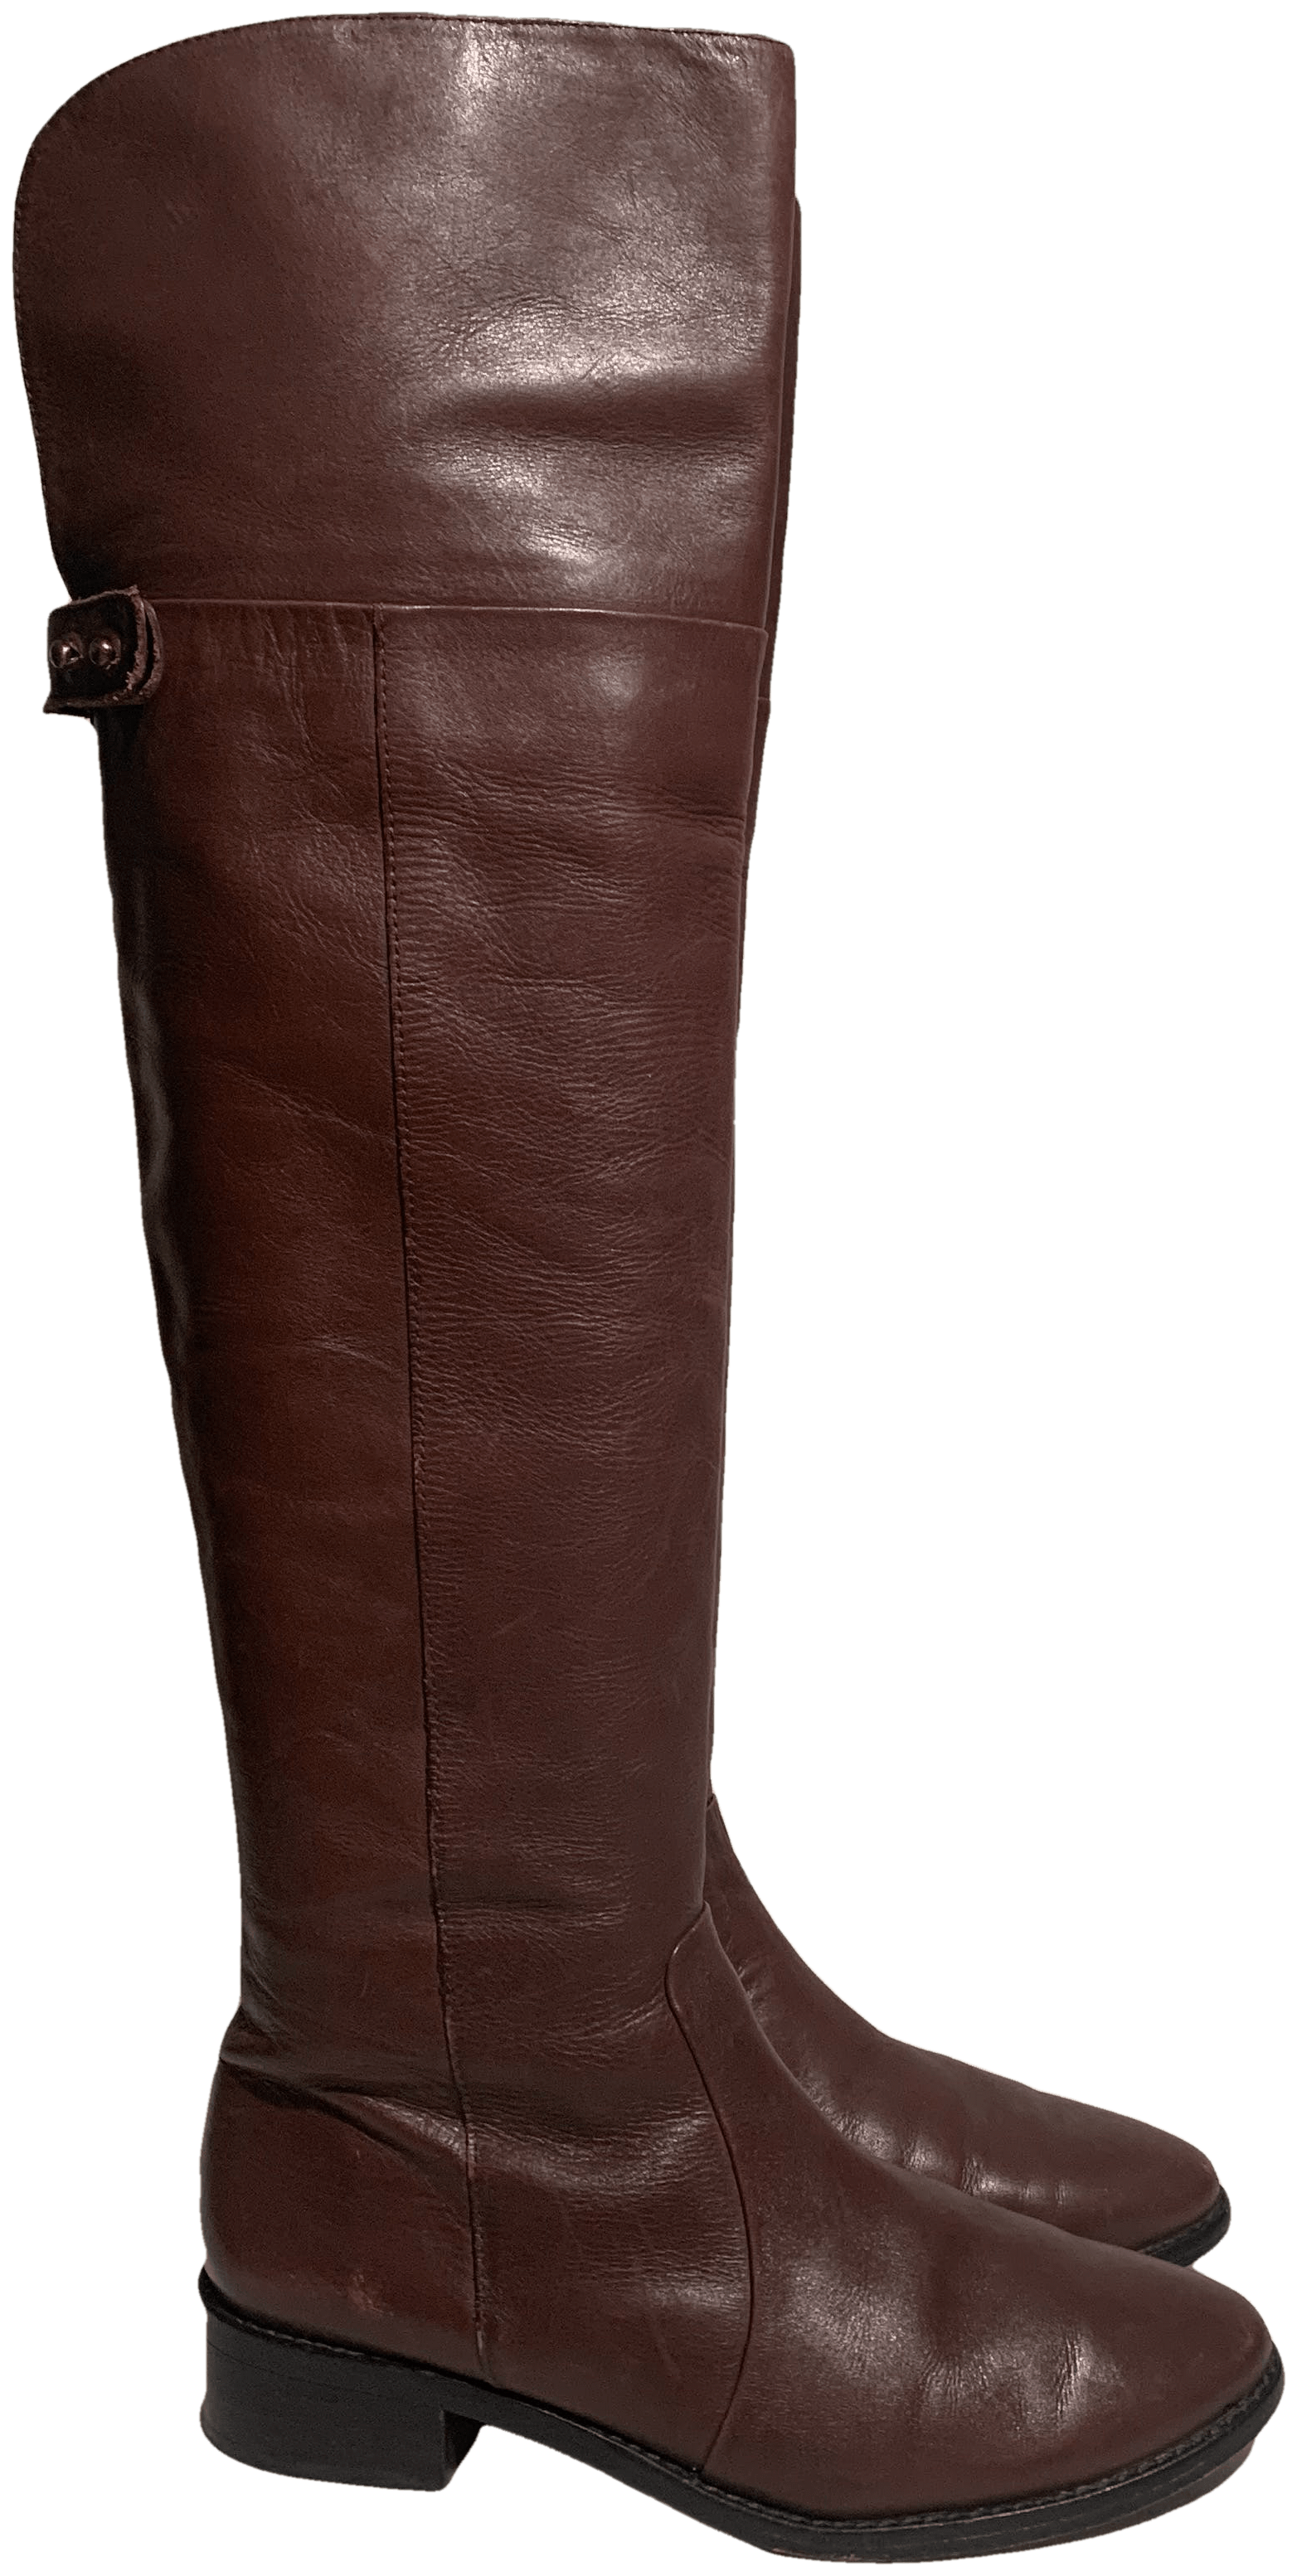 over the knee boots chestnut